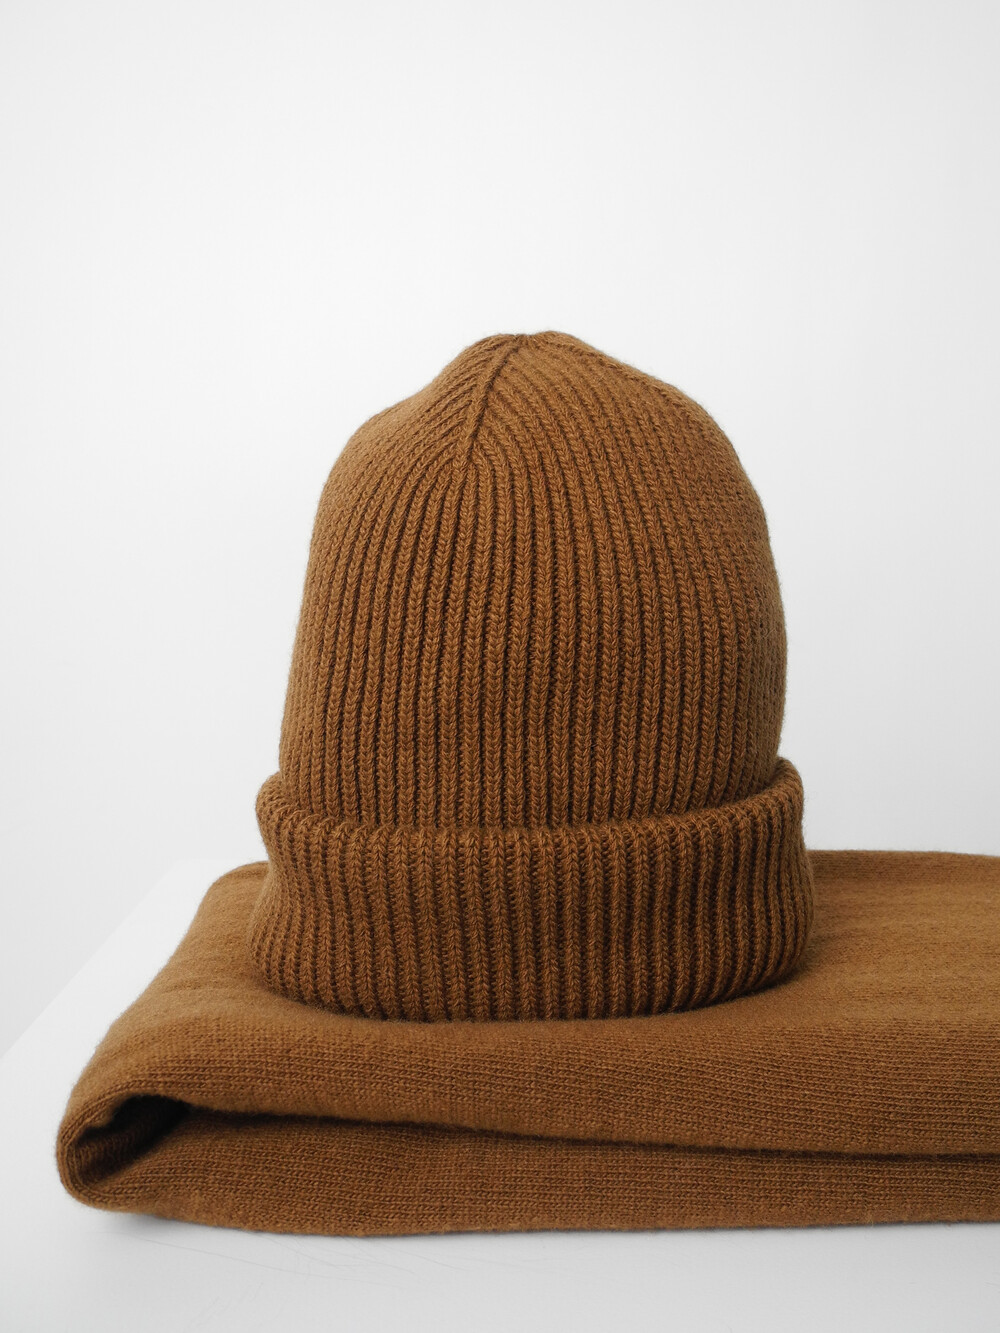 C.O.S.Y by SjaalMania Cosy Beanie Toffee